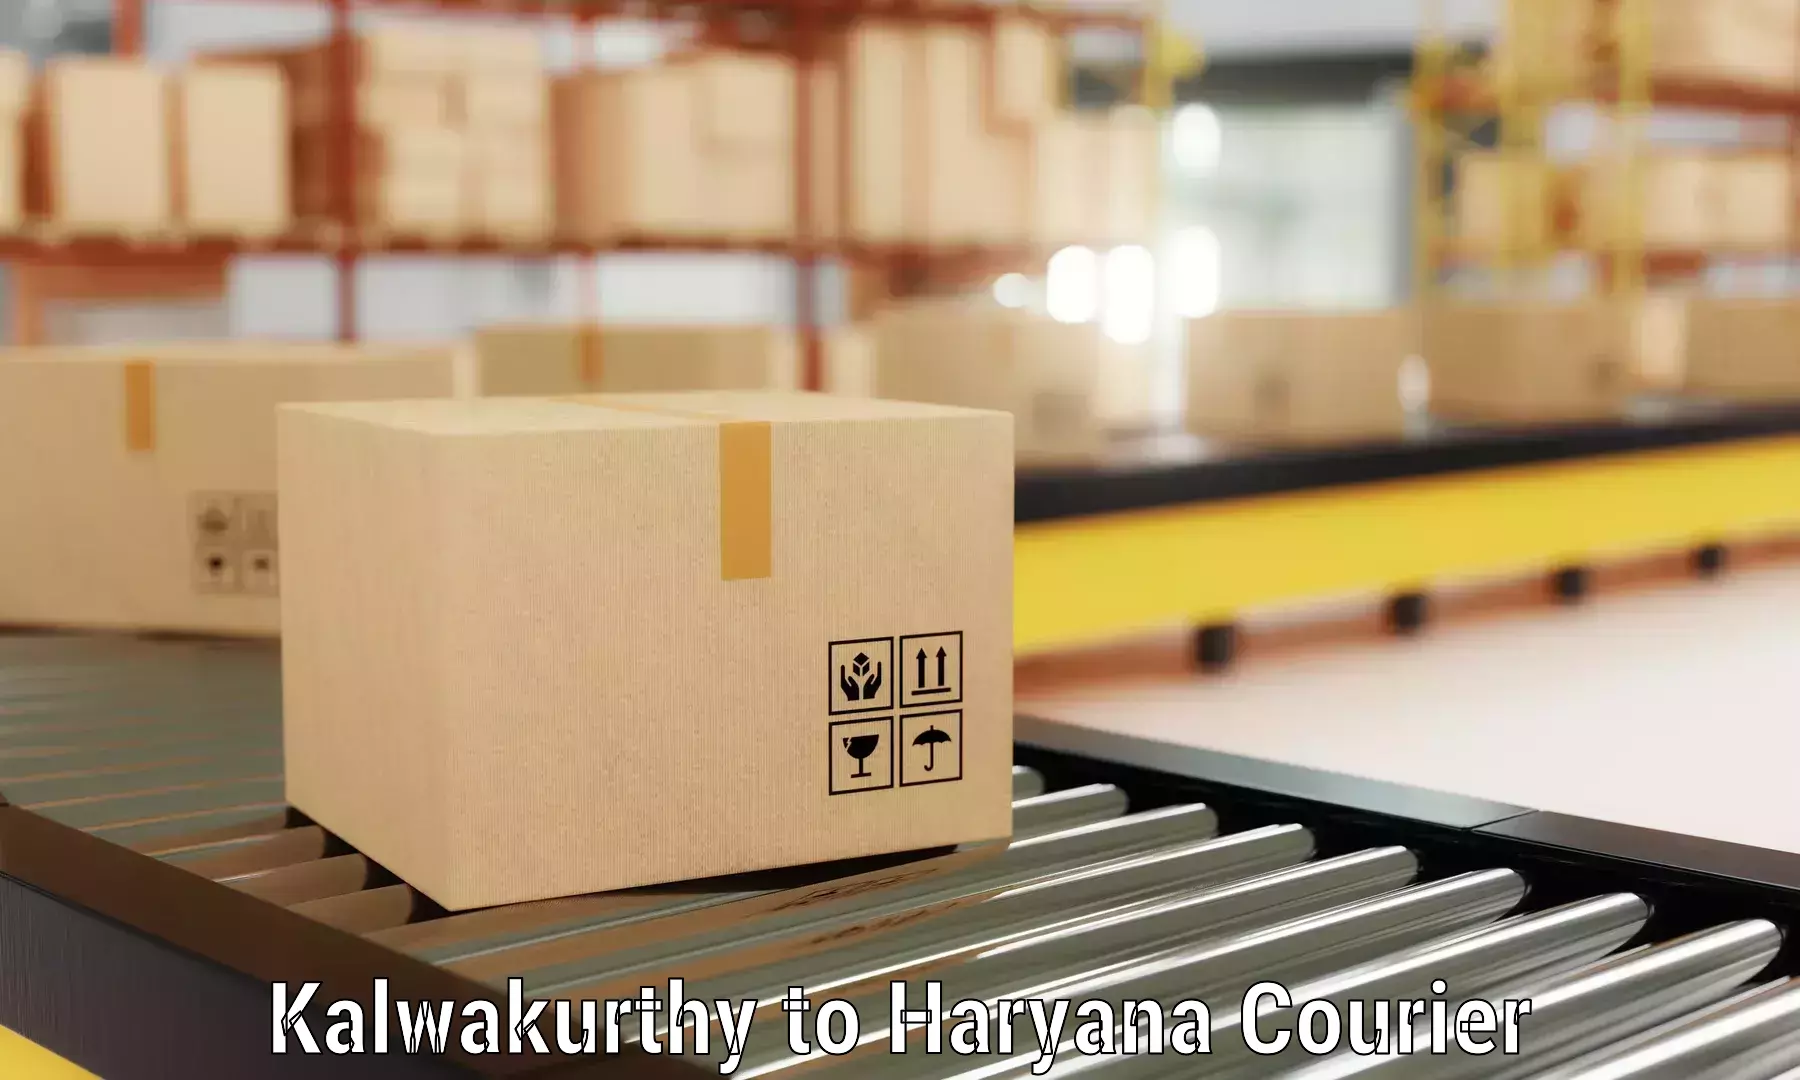 Professional movers and packers Kalwakurthy to Dharuhera